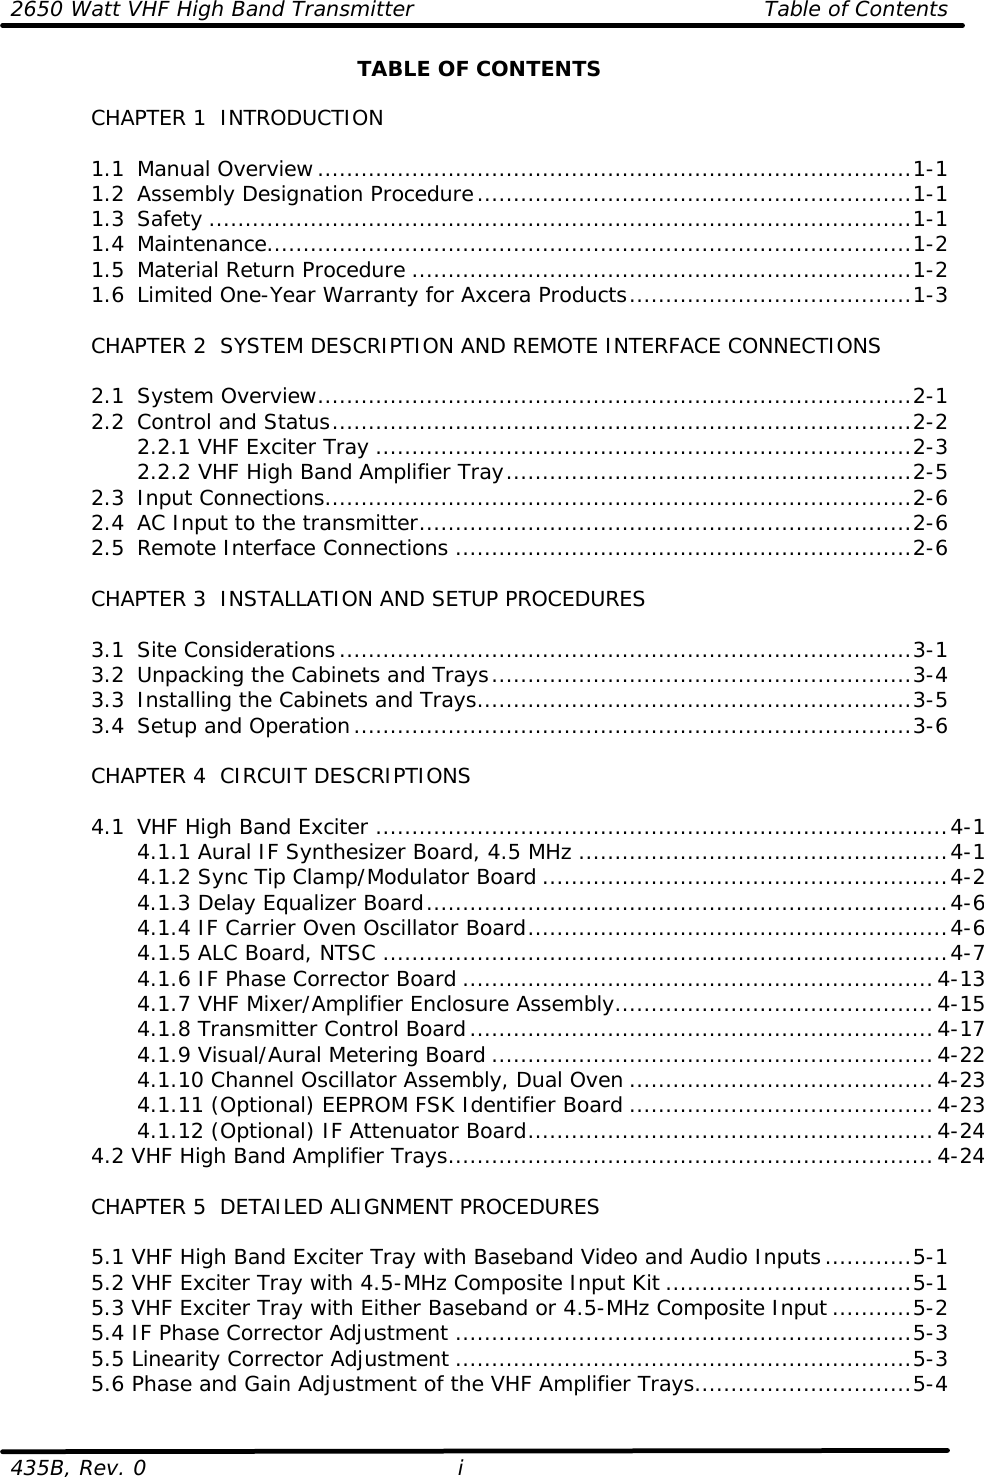 2650 Watt VHF High Band Transmitter Table of Contents  435B, Rev. 0 i TABLE OF CONTENTS   CHAPTER 1  INTRODUCTION   1.1 Manual Overview..................................................................................1-1  1.2 Assembly Designation Procedure............................................................1-1  1.3 Safety .................................................................................................1-1  1.4 Maintenance.........................................................................................1-2  1.5 Material Return Procedure .....................................................................1-2  1.6 Limited One-Year Warranty for Axcera Products.......................................1-3   CHAPTER 2  SYSTEM DESCRIPTION AND REMOTE INTERFACE CONNECTIONS   2.1 System Overview..................................................................................2-1  2.2 Control and Status................................................................................2-2     2.2.1 VHF Exciter Tray ..........................................................................2-3     2.2.2 VHF High Band Amplifier Tray........................................................2-5  2.3 Input Connections.................................................................................2-6  2.4 AC Input to the transmitter....................................................................2-6  2.5 Remote Interface Connections ...............................................................2-6       CHAPTER 3  INSTALLATION AND SETUP PROCEDURES     3.1 Site Considerations...............................................................................3-1  3.2 Unpacking the Cabinets and Trays..........................................................3-4  3.3 Installing the Cabinets and Trays............................................................3-5  3.4 Setup and Operation.............................................................................3-6   CHAPTER 4  CIRCUIT DESCRIPTIONS   4.1 VHF High Band Exciter ...............................................................................4-1     4.1.1 Aural IF Synthesizer Board, 4.5 MHz ...................................................4-1     4.1.2 Sync Tip Clamp/Modulator Board ........................................................4-2     4.1.3 Delay Equalizer Board........................................................................4-6     4.1.4 IF Carrier Oven Oscillator Board..........................................................4-6     4.1.5 ALC Board, NTSC ..............................................................................4-7     4.1.6 IF Phase Corrector Board .................................................................4-13     4.1.7 VHF Mixer/Amplifier Enclosure Assembly............................................4-15     4.1.8 Transmitter Control Board................................................................4-17     4.1.9 Visual/Aural Metering Board .............................................................4-22     4.1.10 Channel Oscillator Assembly, Dual Oven ..........................................4-23     4.1.11 (Optional) EEPROM FSK Identifier Board ..........................................4-23     4.1.12 (Optional) IF Attenuator Board........................................................4-24  4.2 VHF High Band Amplifier Trays...................................................................4-24   CHAPTER 5  DETAILED ALIGNMENT PROCEDURES   5.1 VHF High Band Exciter Tray with Baseband Video and Audio Inputs............5-1  5.2 VHF Exciter Tray with 4.5-MHz Composite Input Kit ..................................5-1  5.3 VHF Exciter Tray with Either Baseband or 4.5-MHz Composite Input ...........5-2  5.4 IF Phase Corrector Adjustment ...............................................................5-3  5.5 Linearity Corrector Adjustment ...............................................................5-3 5.6 Phase and Gain Adjustment of the VHF Amplifier Trays..............................5-4 